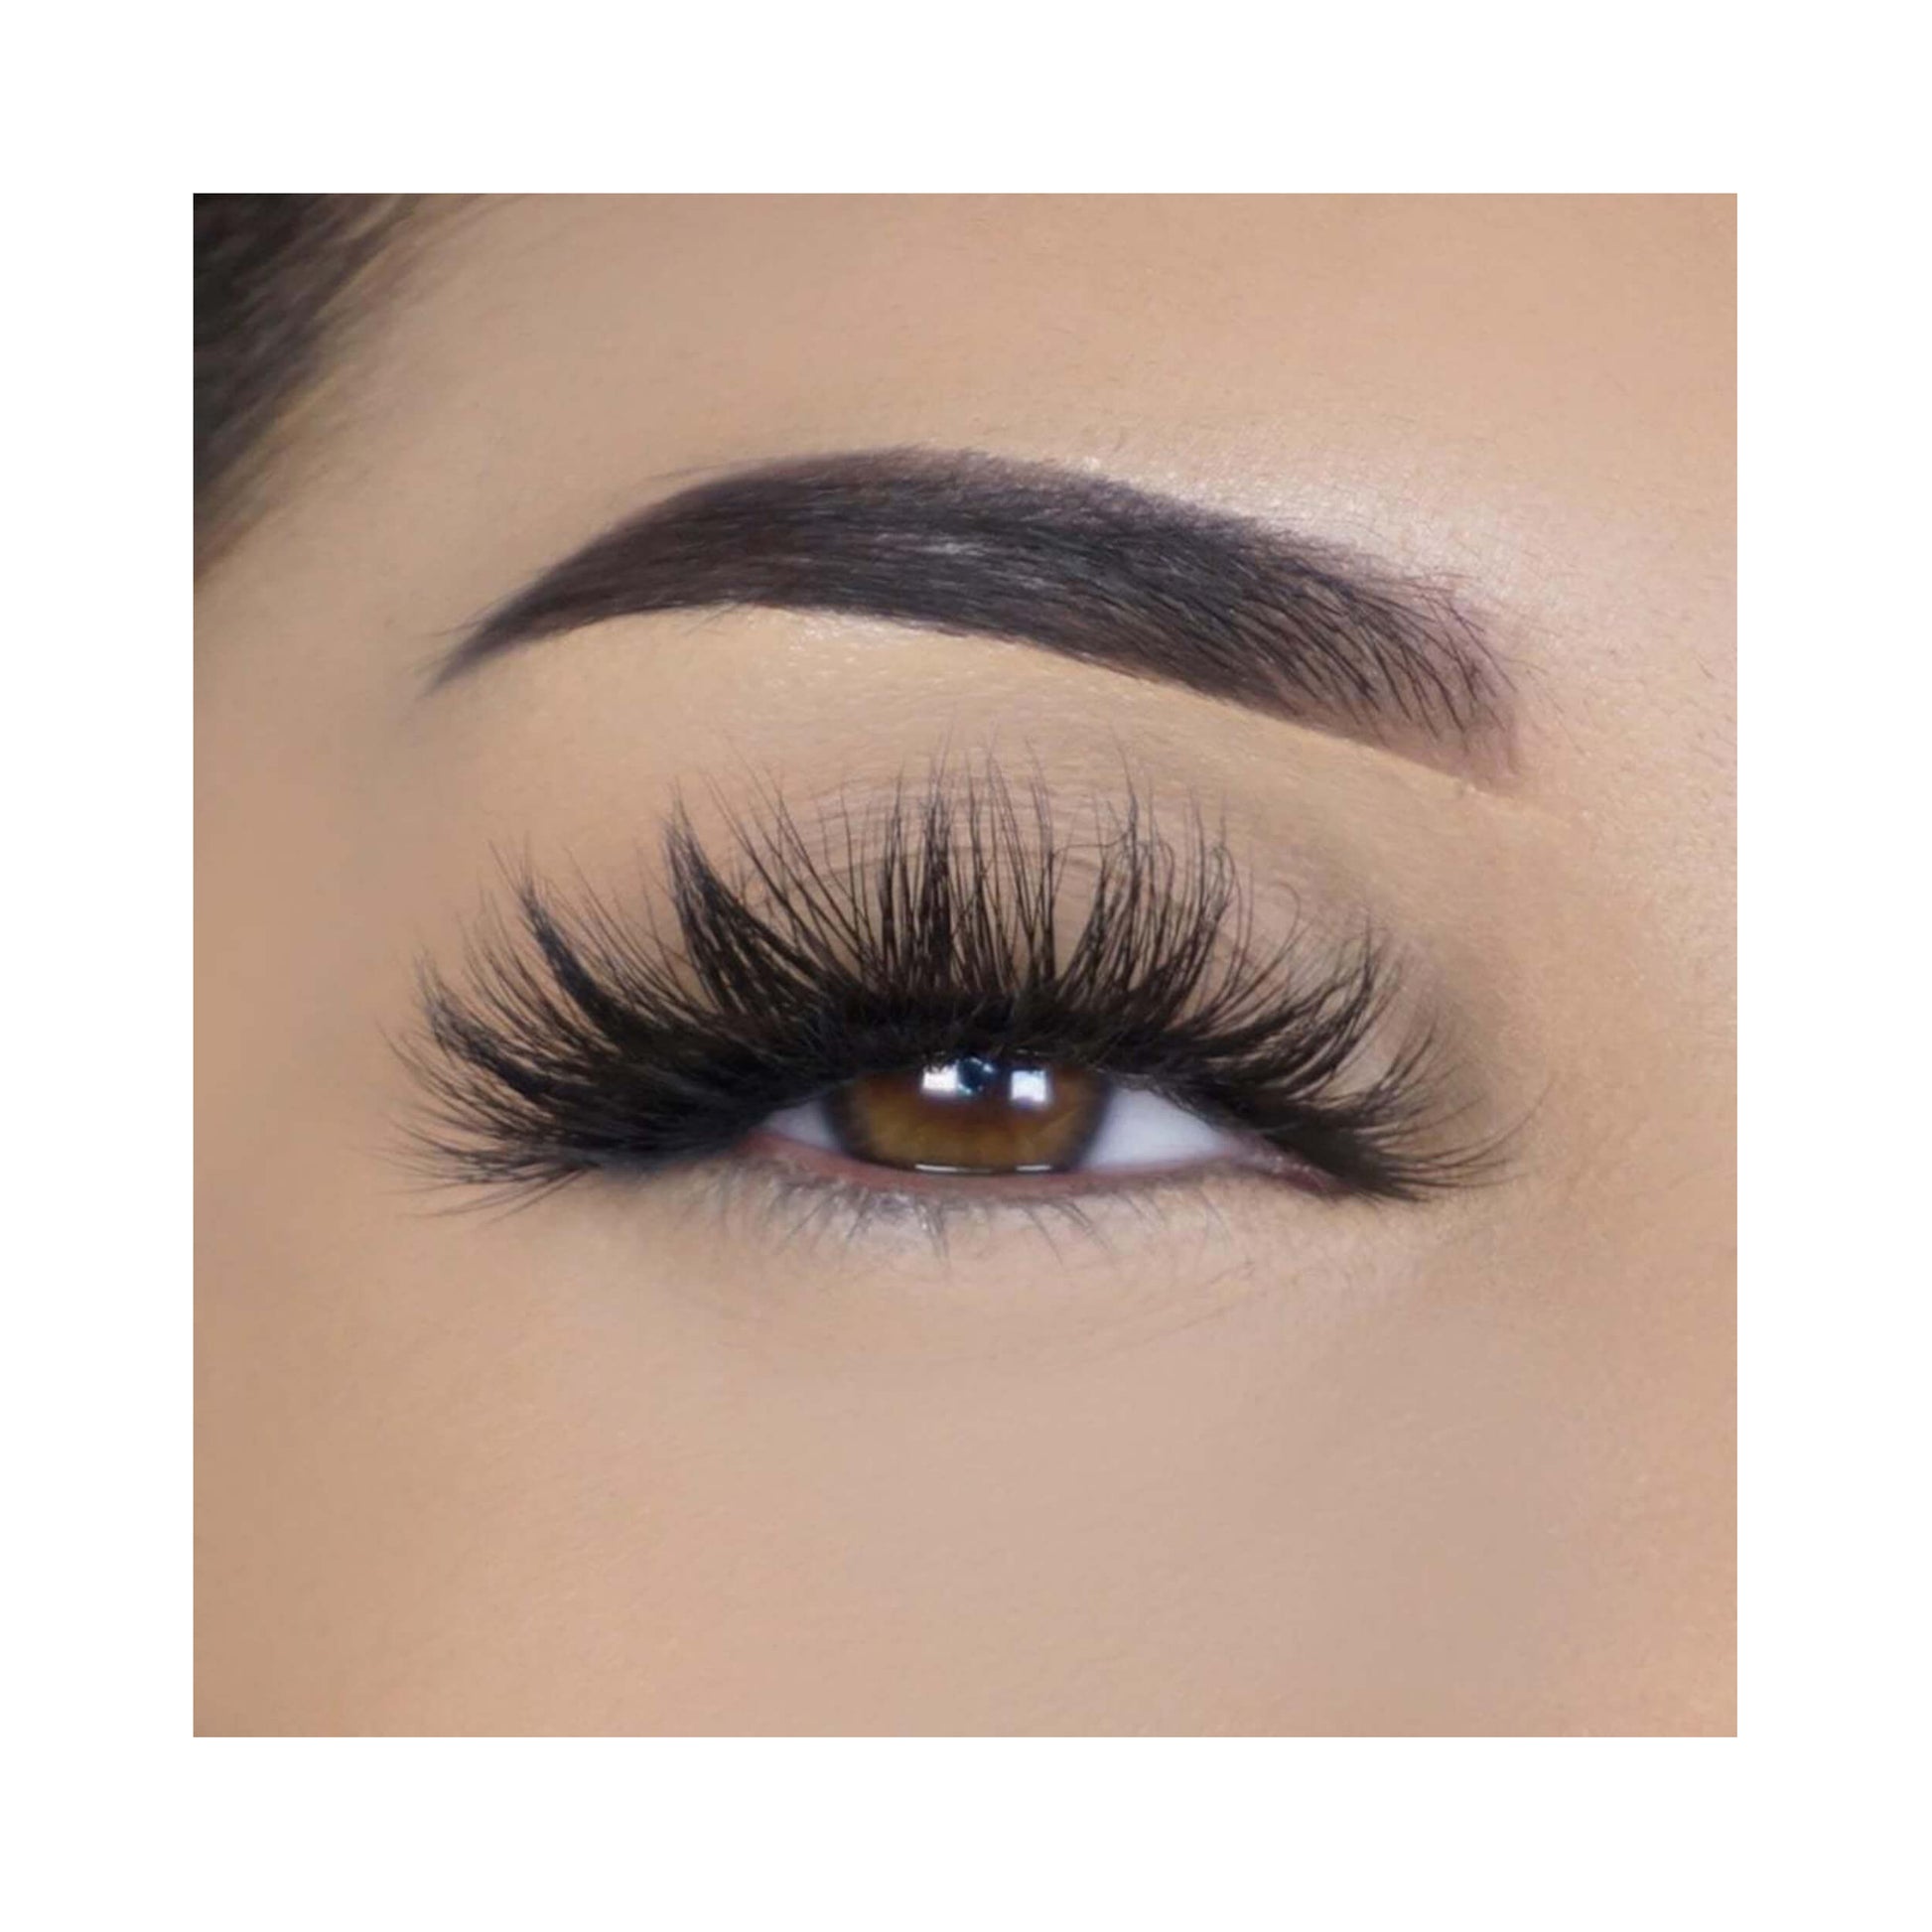 Lilly Lashes "So Extra" Mykonos 3D Mink Lashes